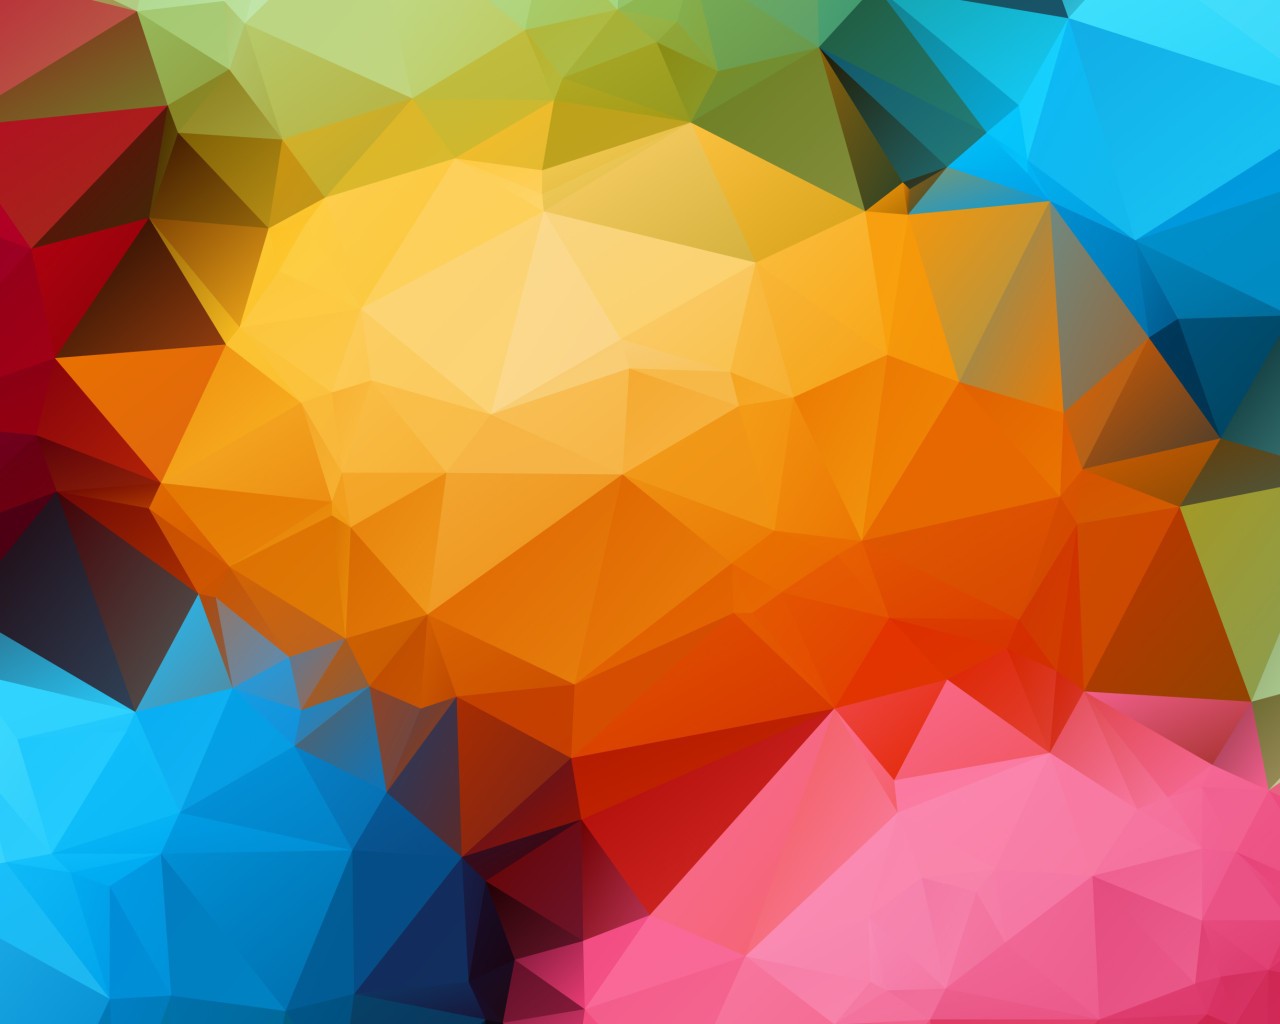 So Without Further Ado, Here Is The 1280 X 1024 Colorful - Surface Pro 3 , HD Wallpaper & Backgrounds